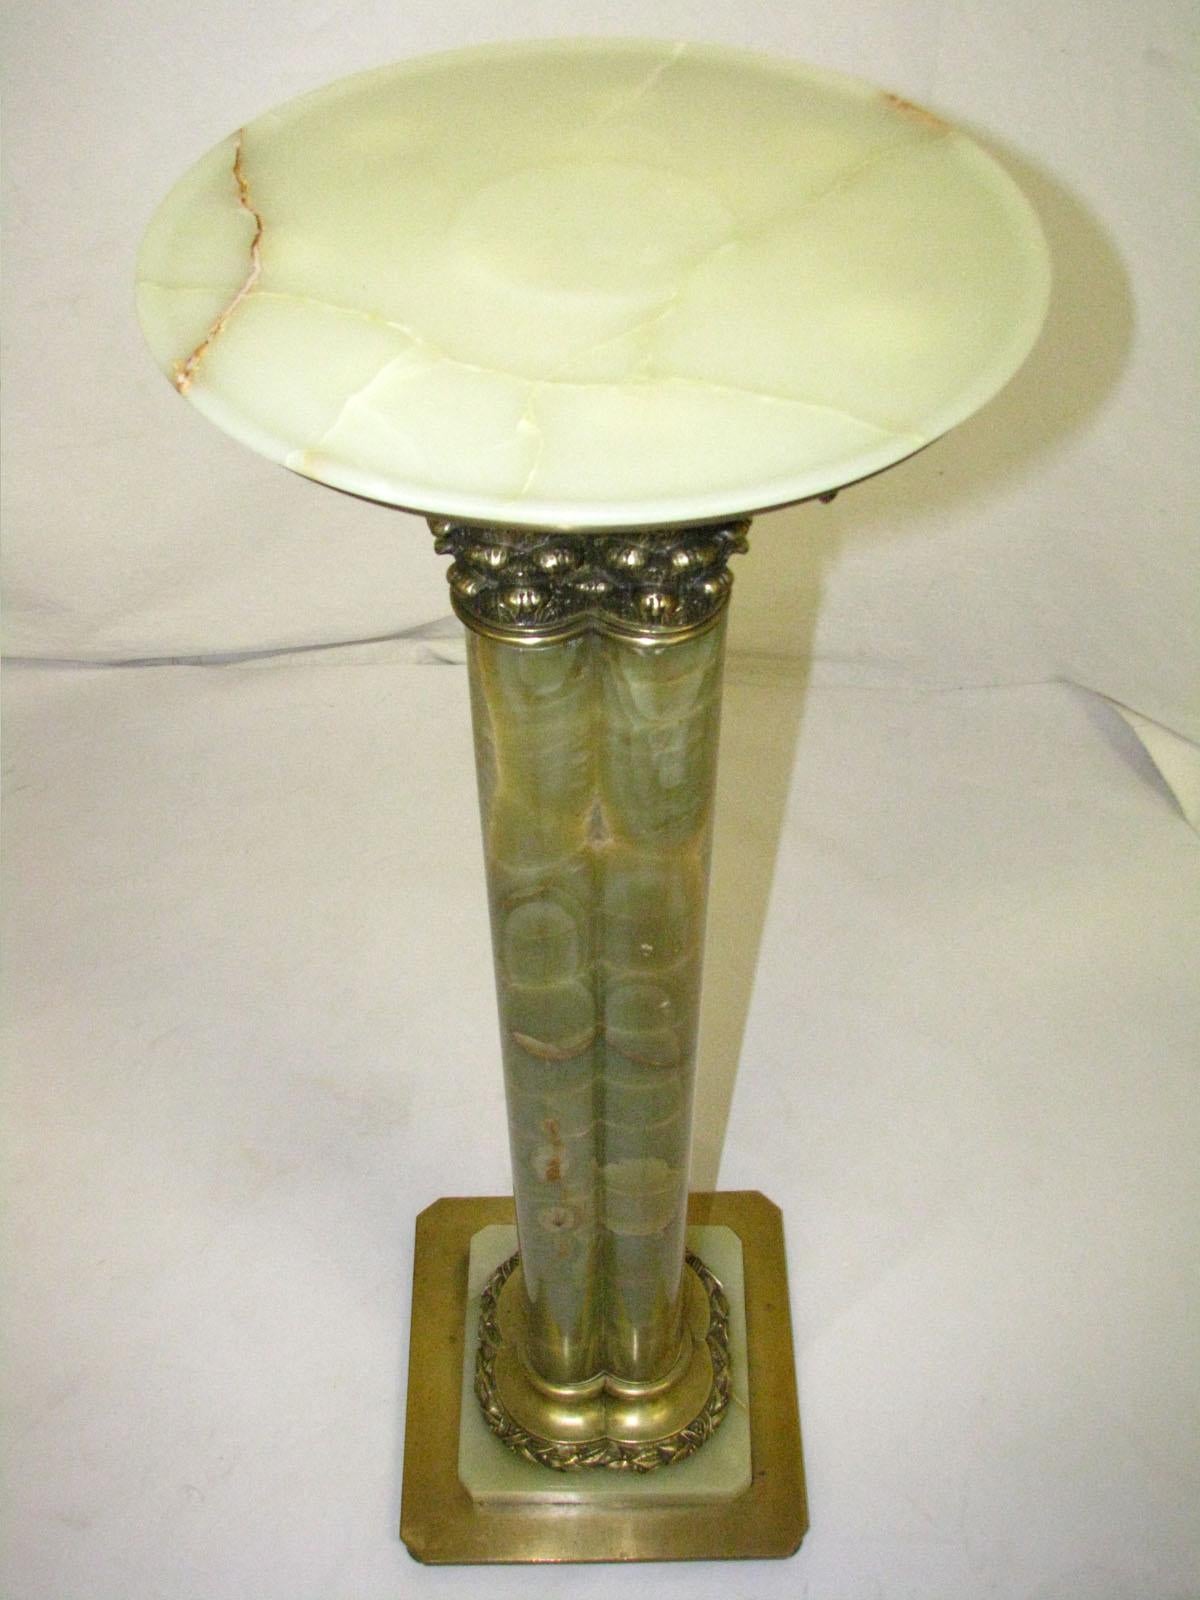 Polished Green Onyx Column / Pedestal, 20th Century In Good Condition For Sale In Liverpool, GB